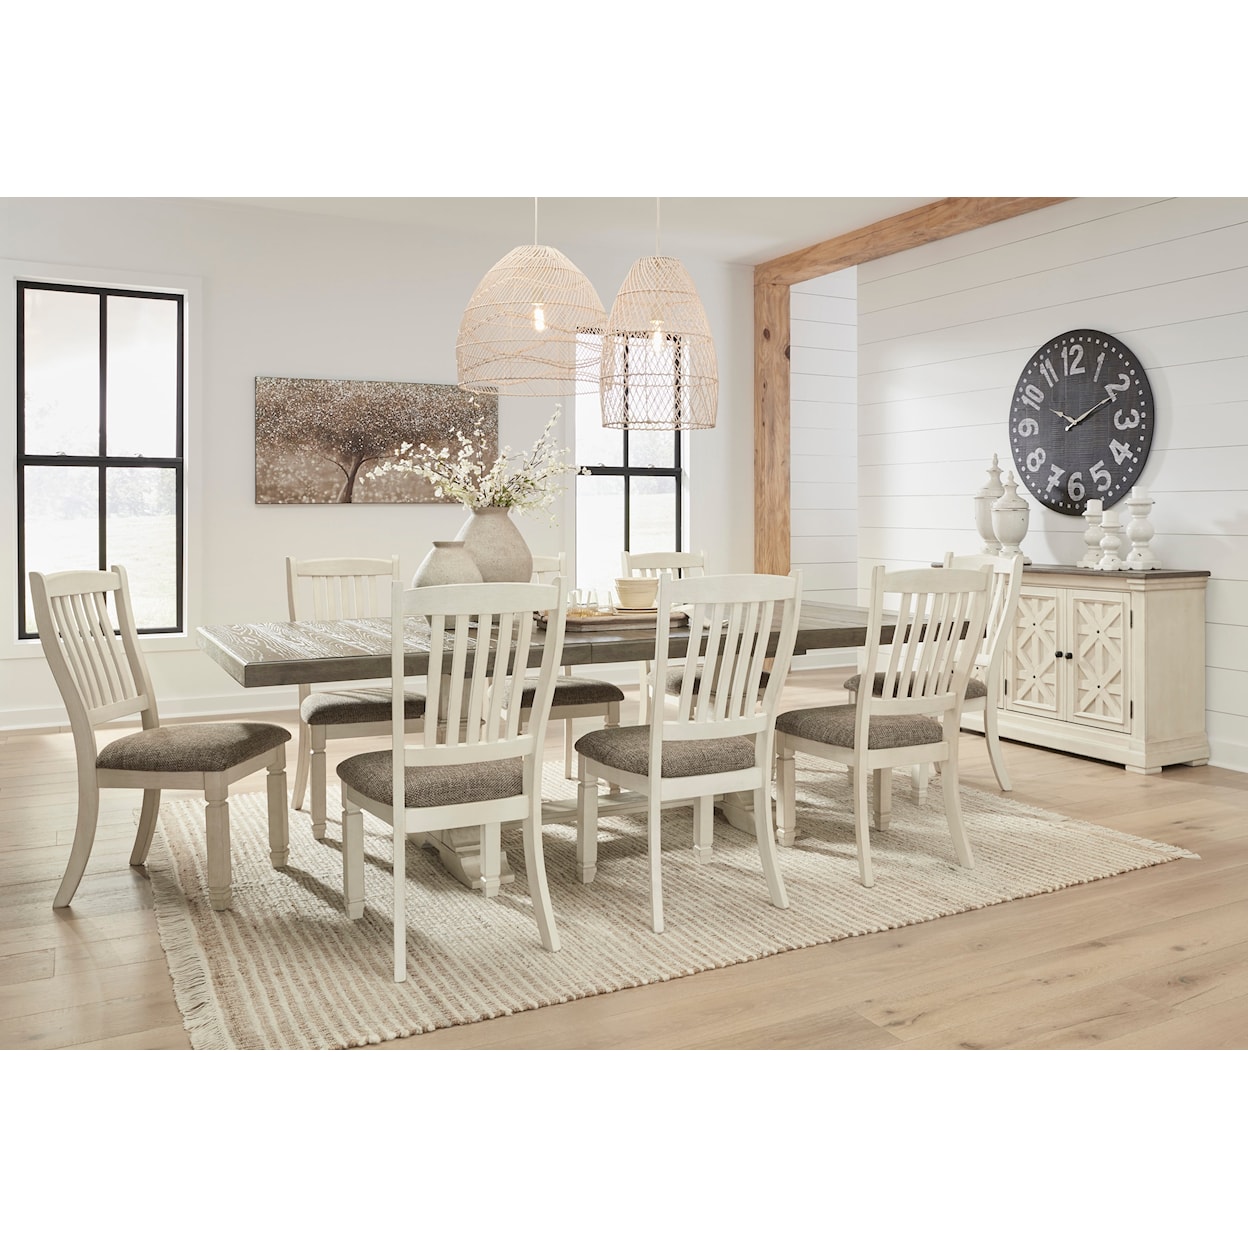 Benchcraft Bolanburg Extension Dining Table